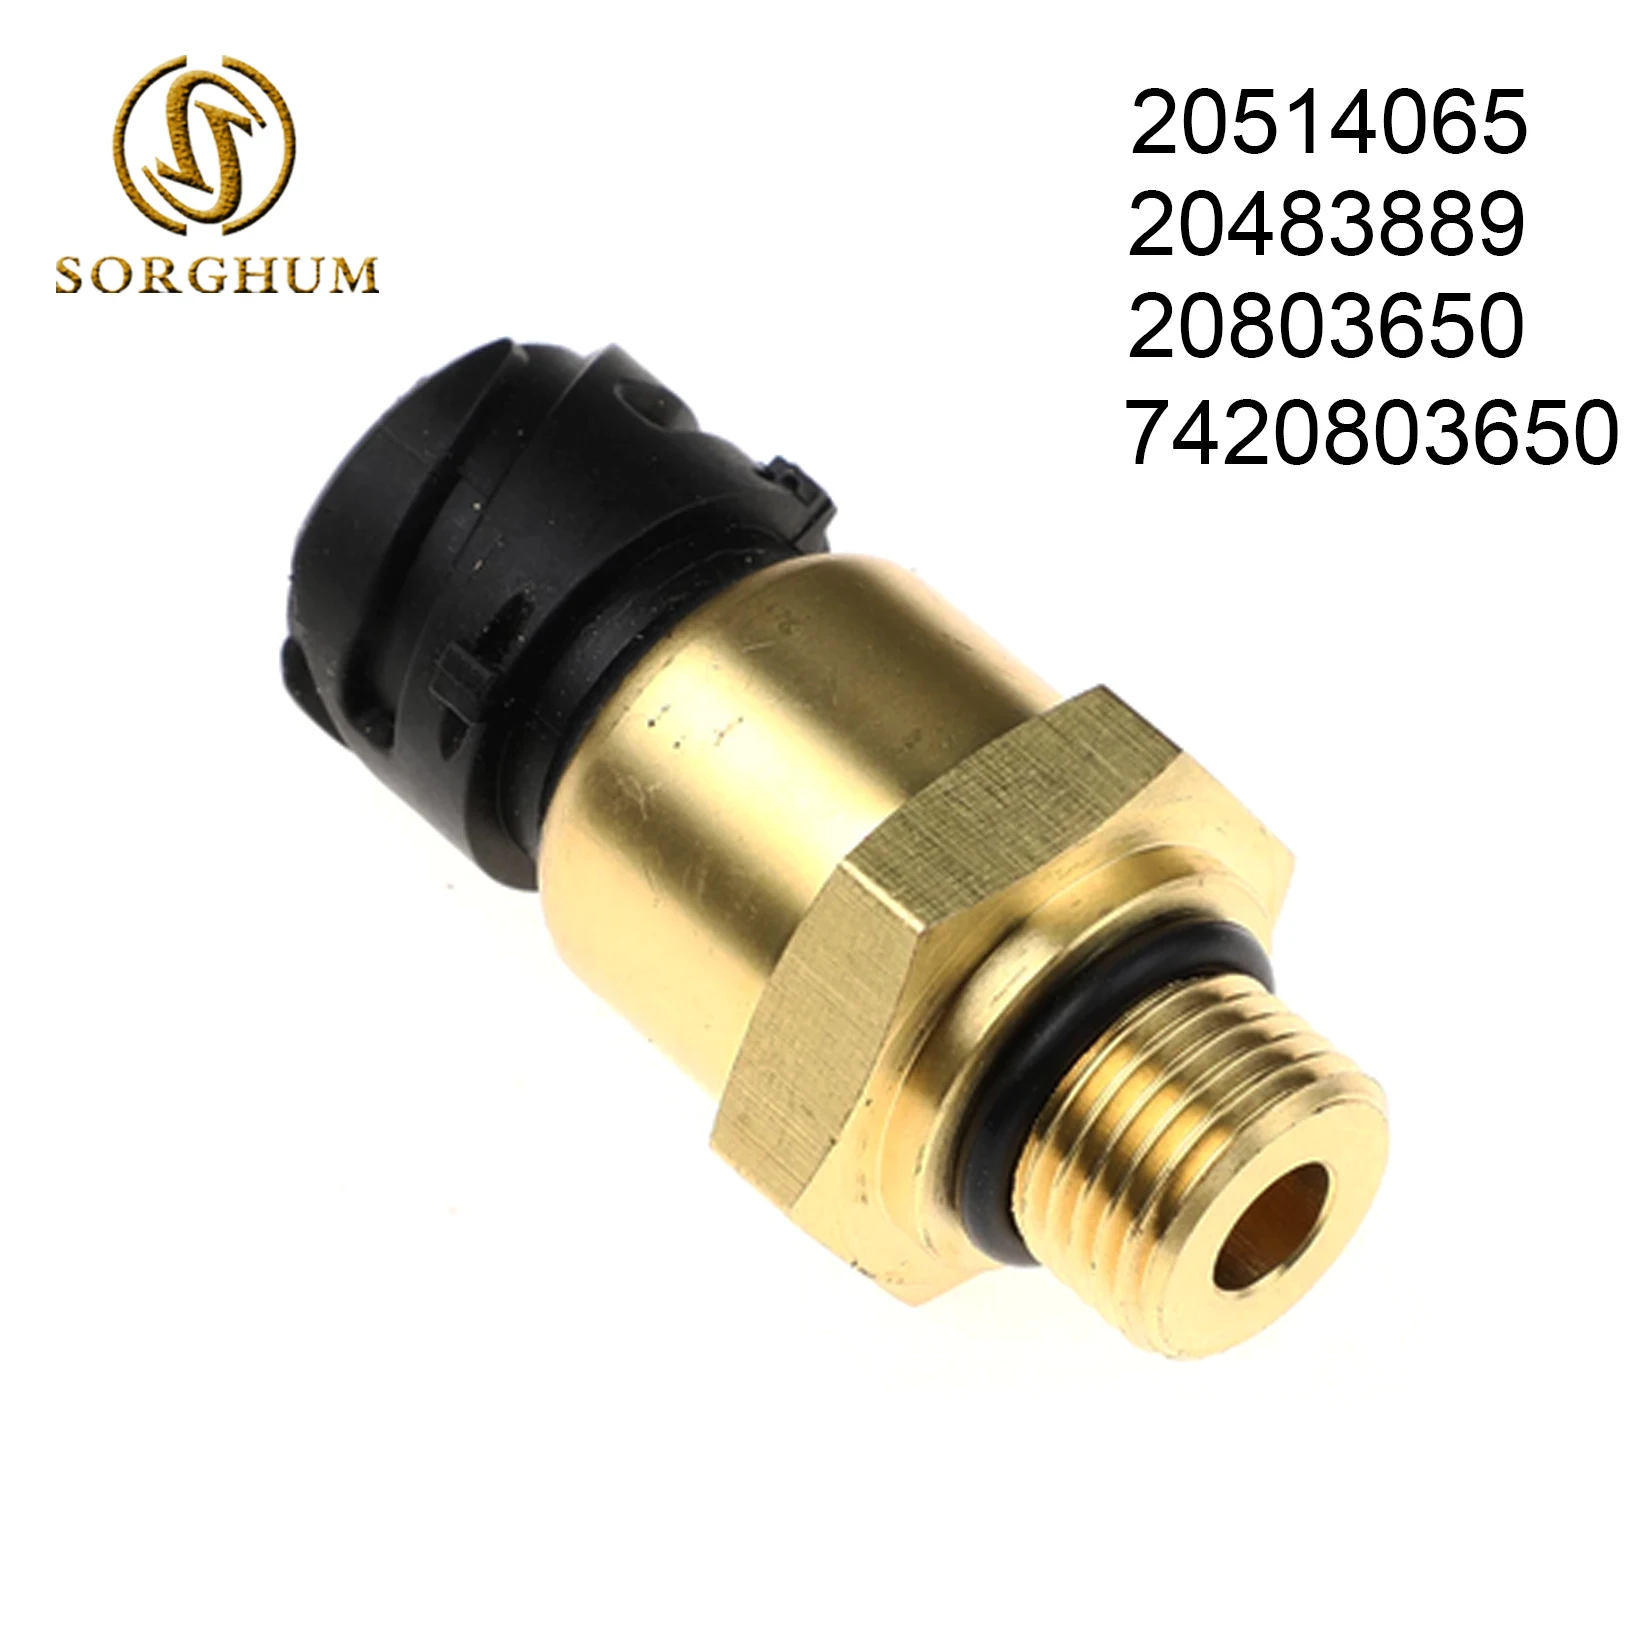 Sorghum 20514065 Engine Fuel Oil Pressure Sensor Switch For Renault For Volvo FH FM Truck 7420803650 20483889 20803650